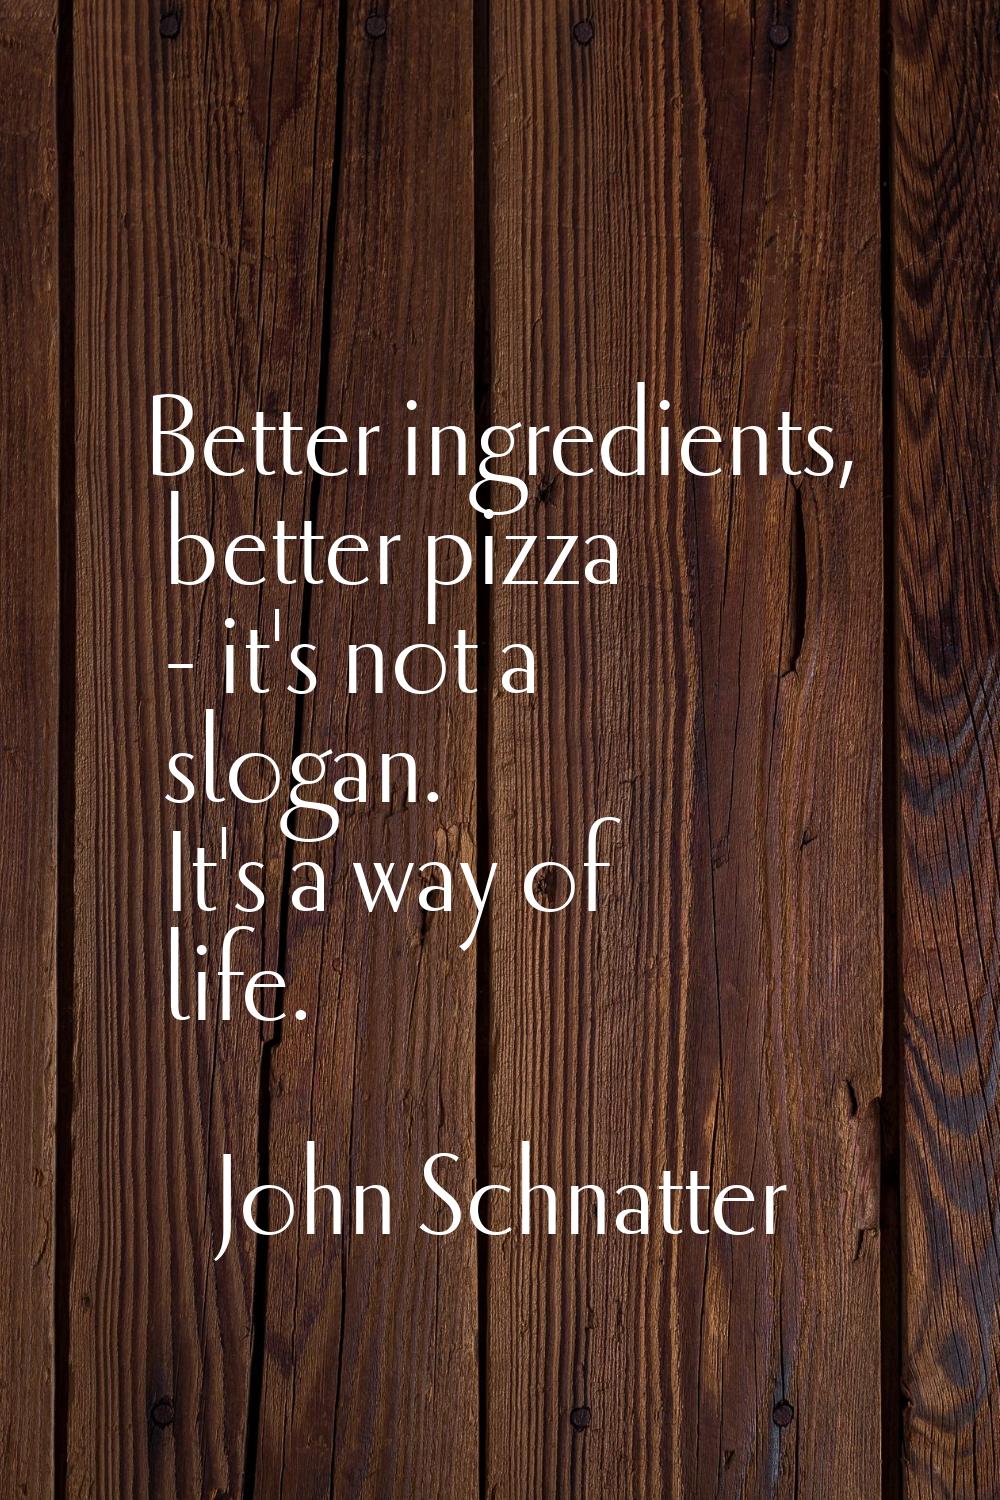 Better ingredients, better pizza - it's not a slogan. It's a way of life.